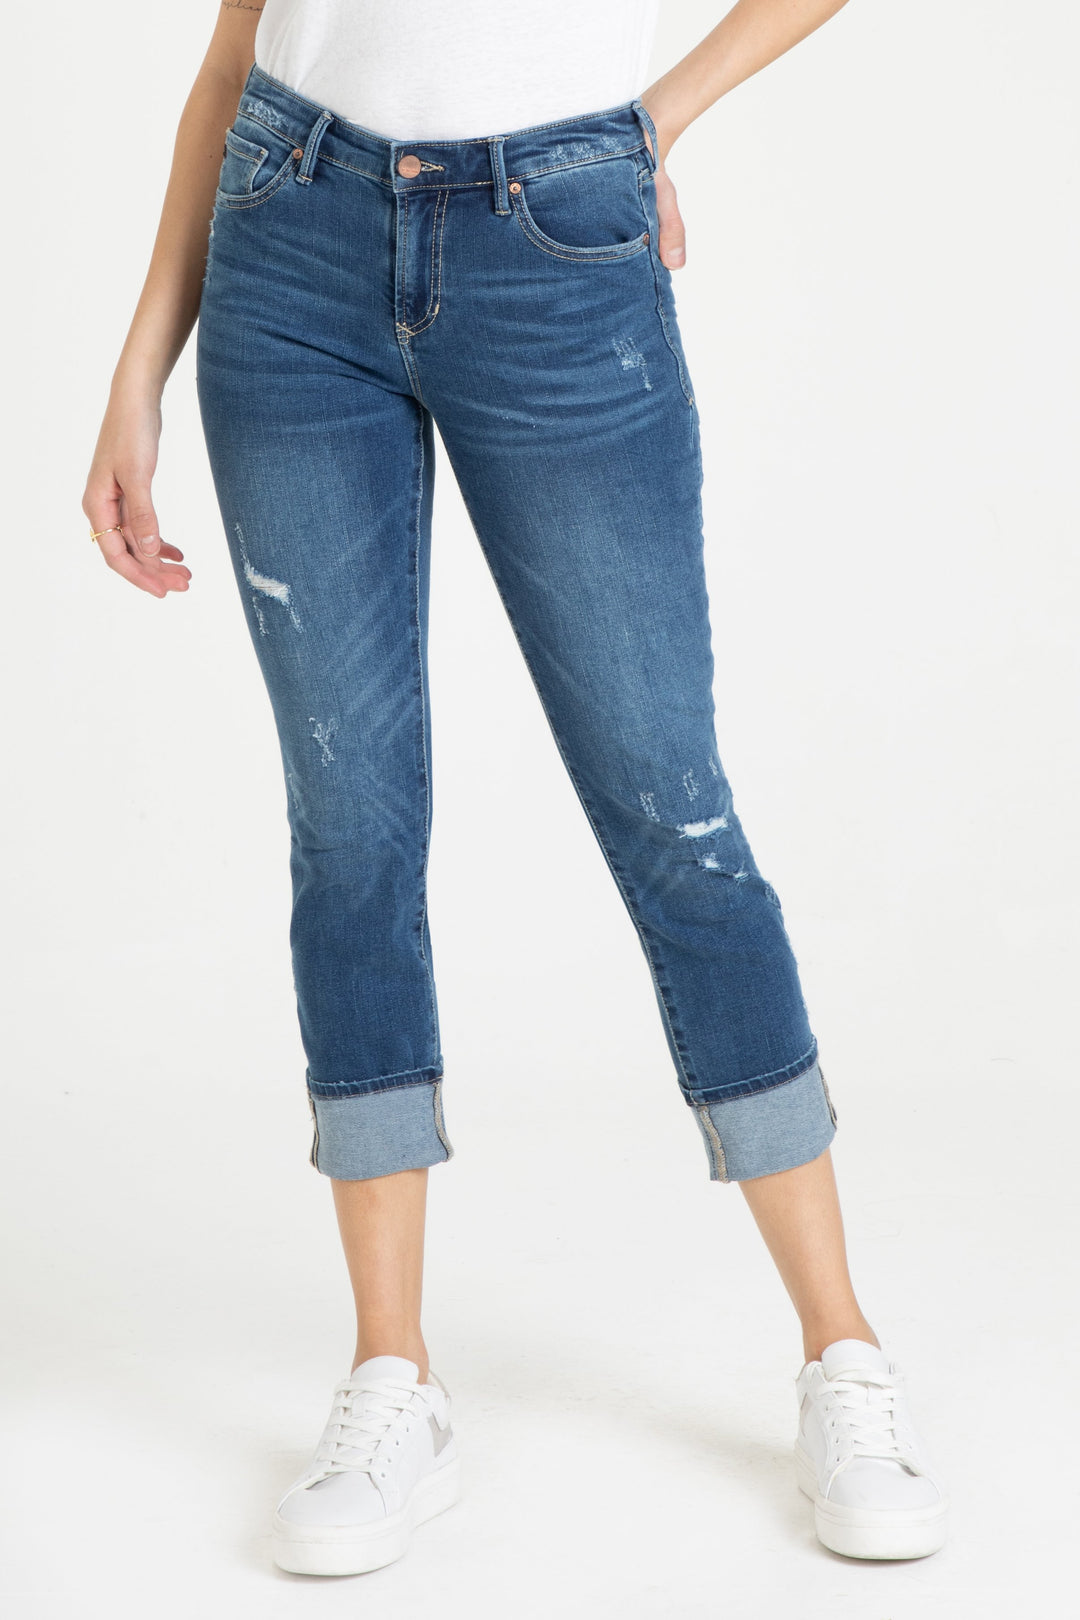 image of a female model wearing a BLAIRE HIGH RISE CUFFED SLIM STRAIGHT JEANS MEMPHIS JEANS